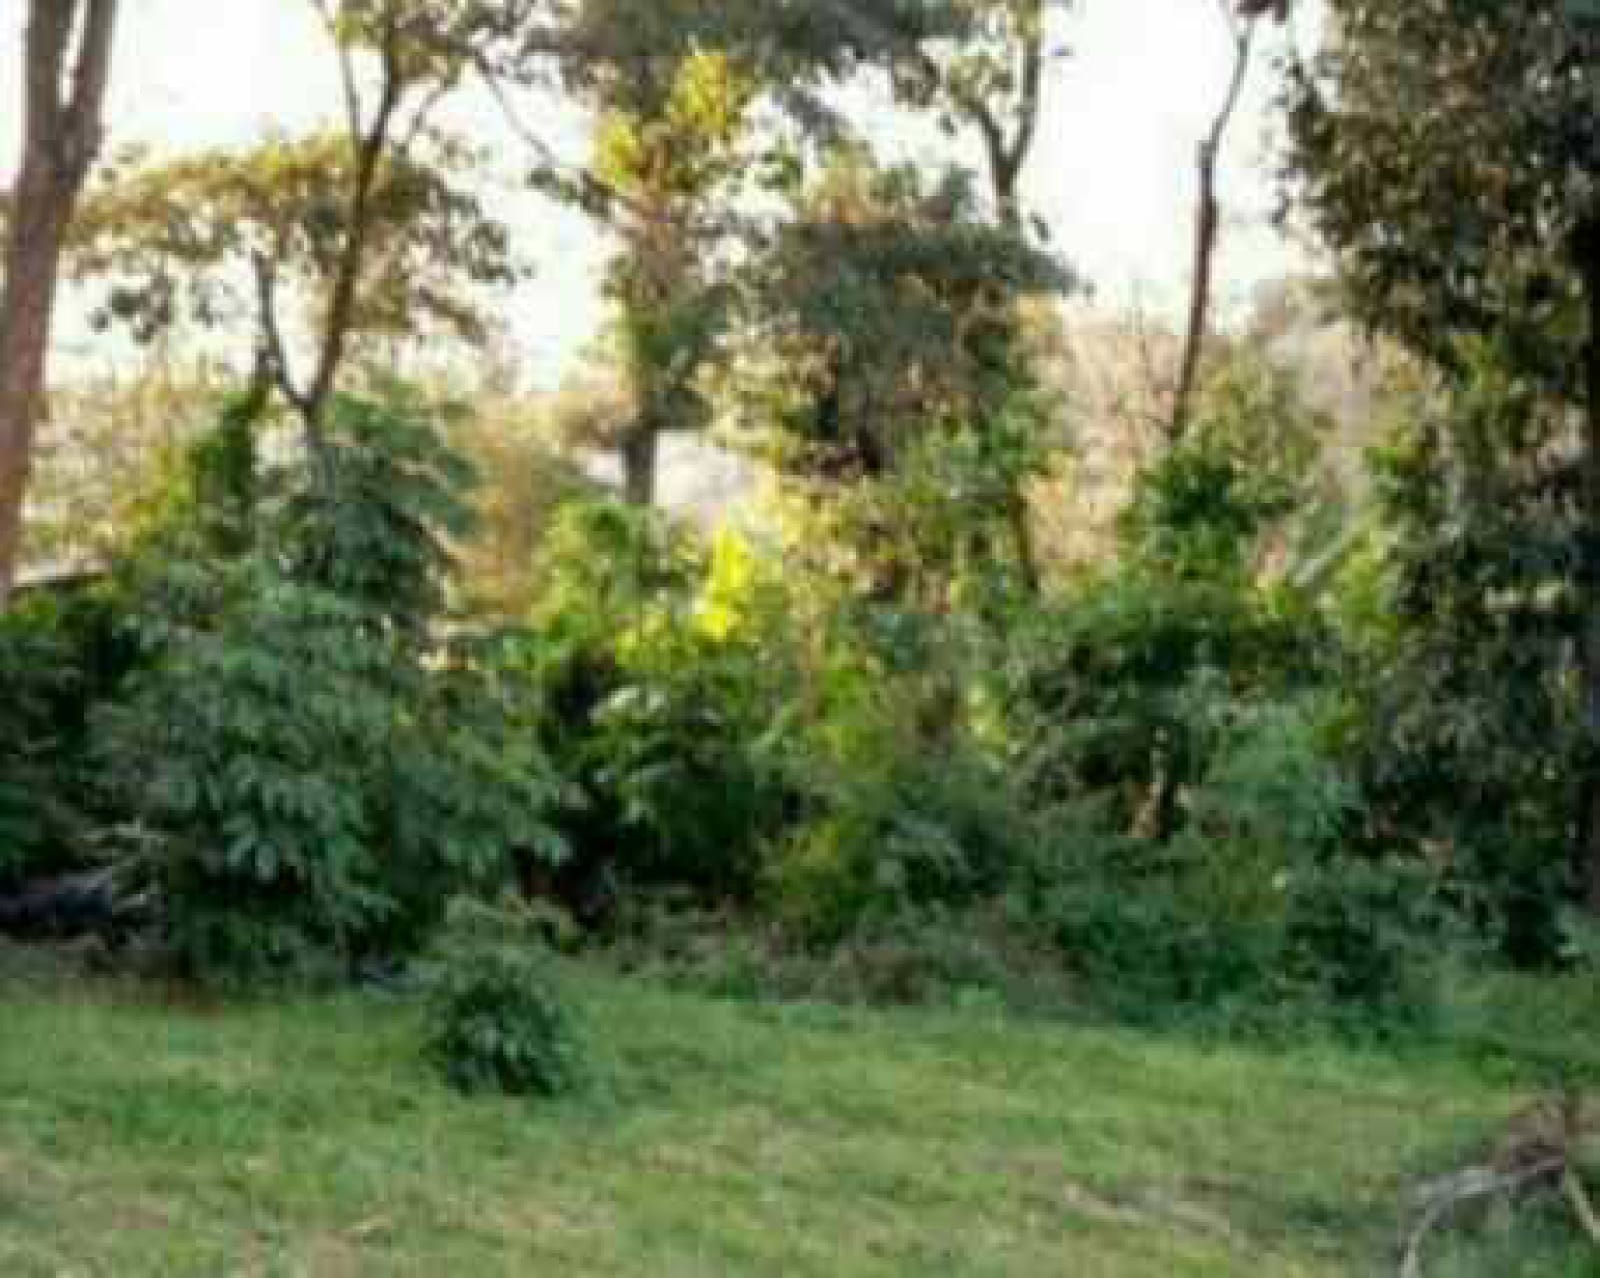 List of 100 Land For Sale In Karen Kenya Ready Clean Title Deed, House For Sale and Rent BEST PRICES acre Acres